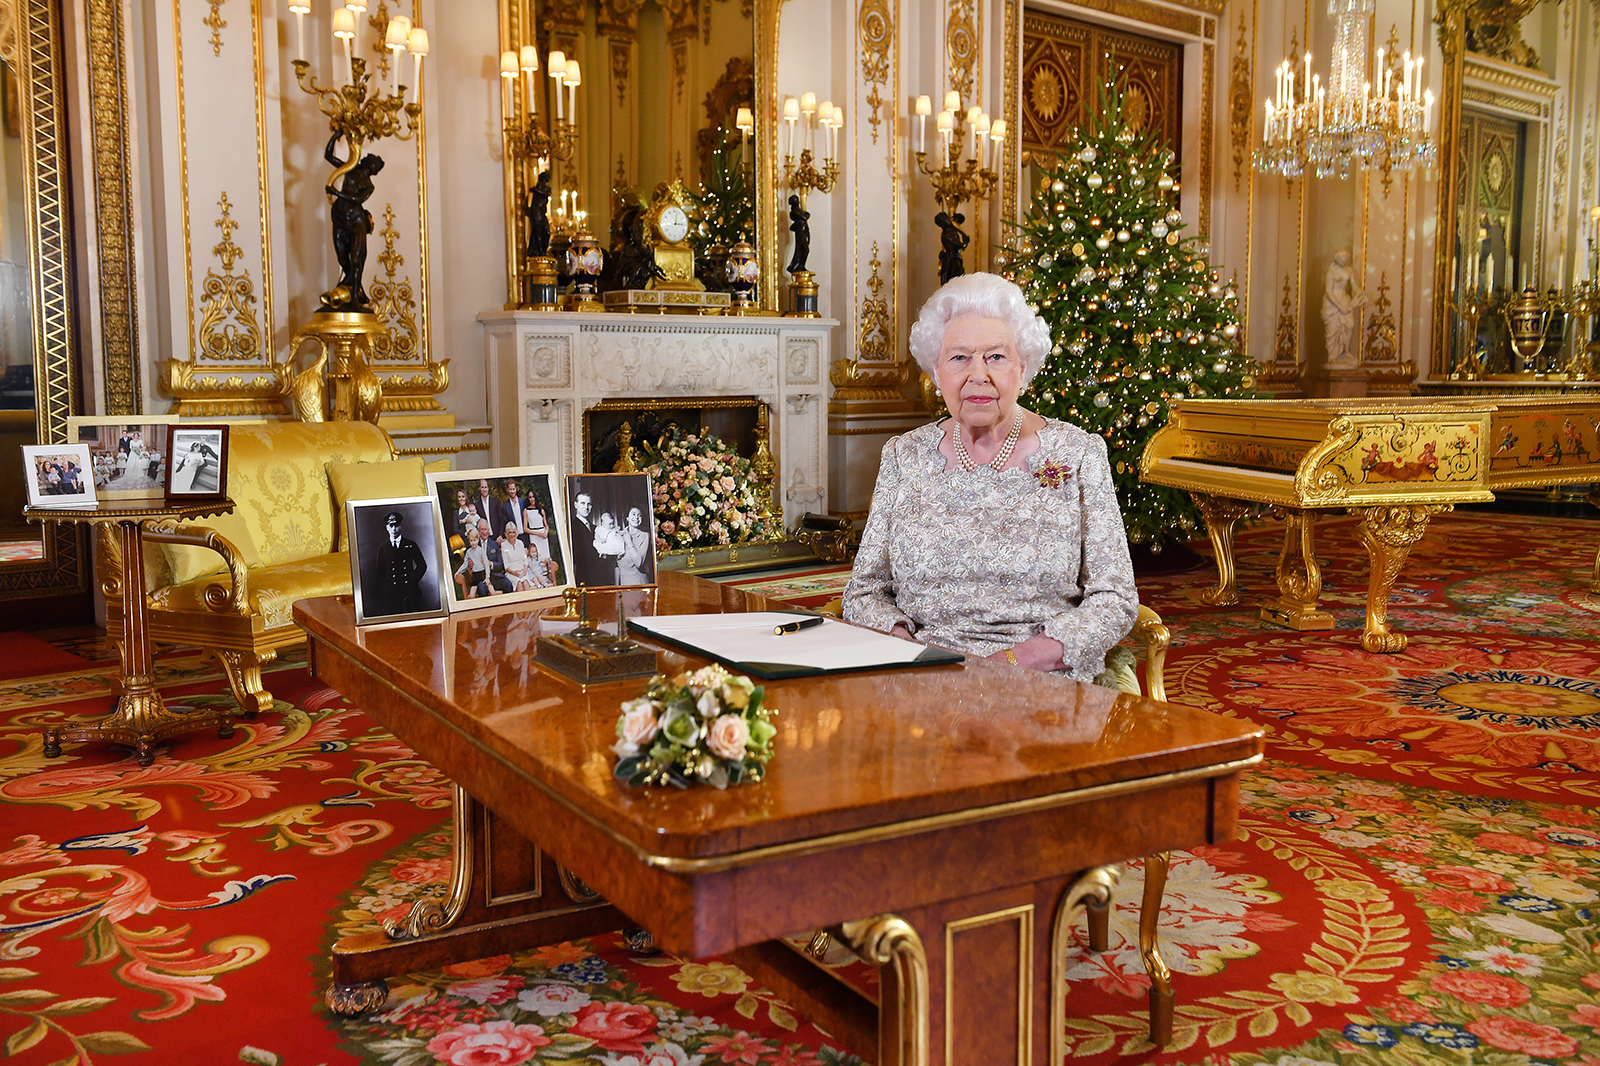 Queen Elizabeth poses for a photo at the Buckingham Palace in London on December 25, 2018 in London, United Kingdom. 